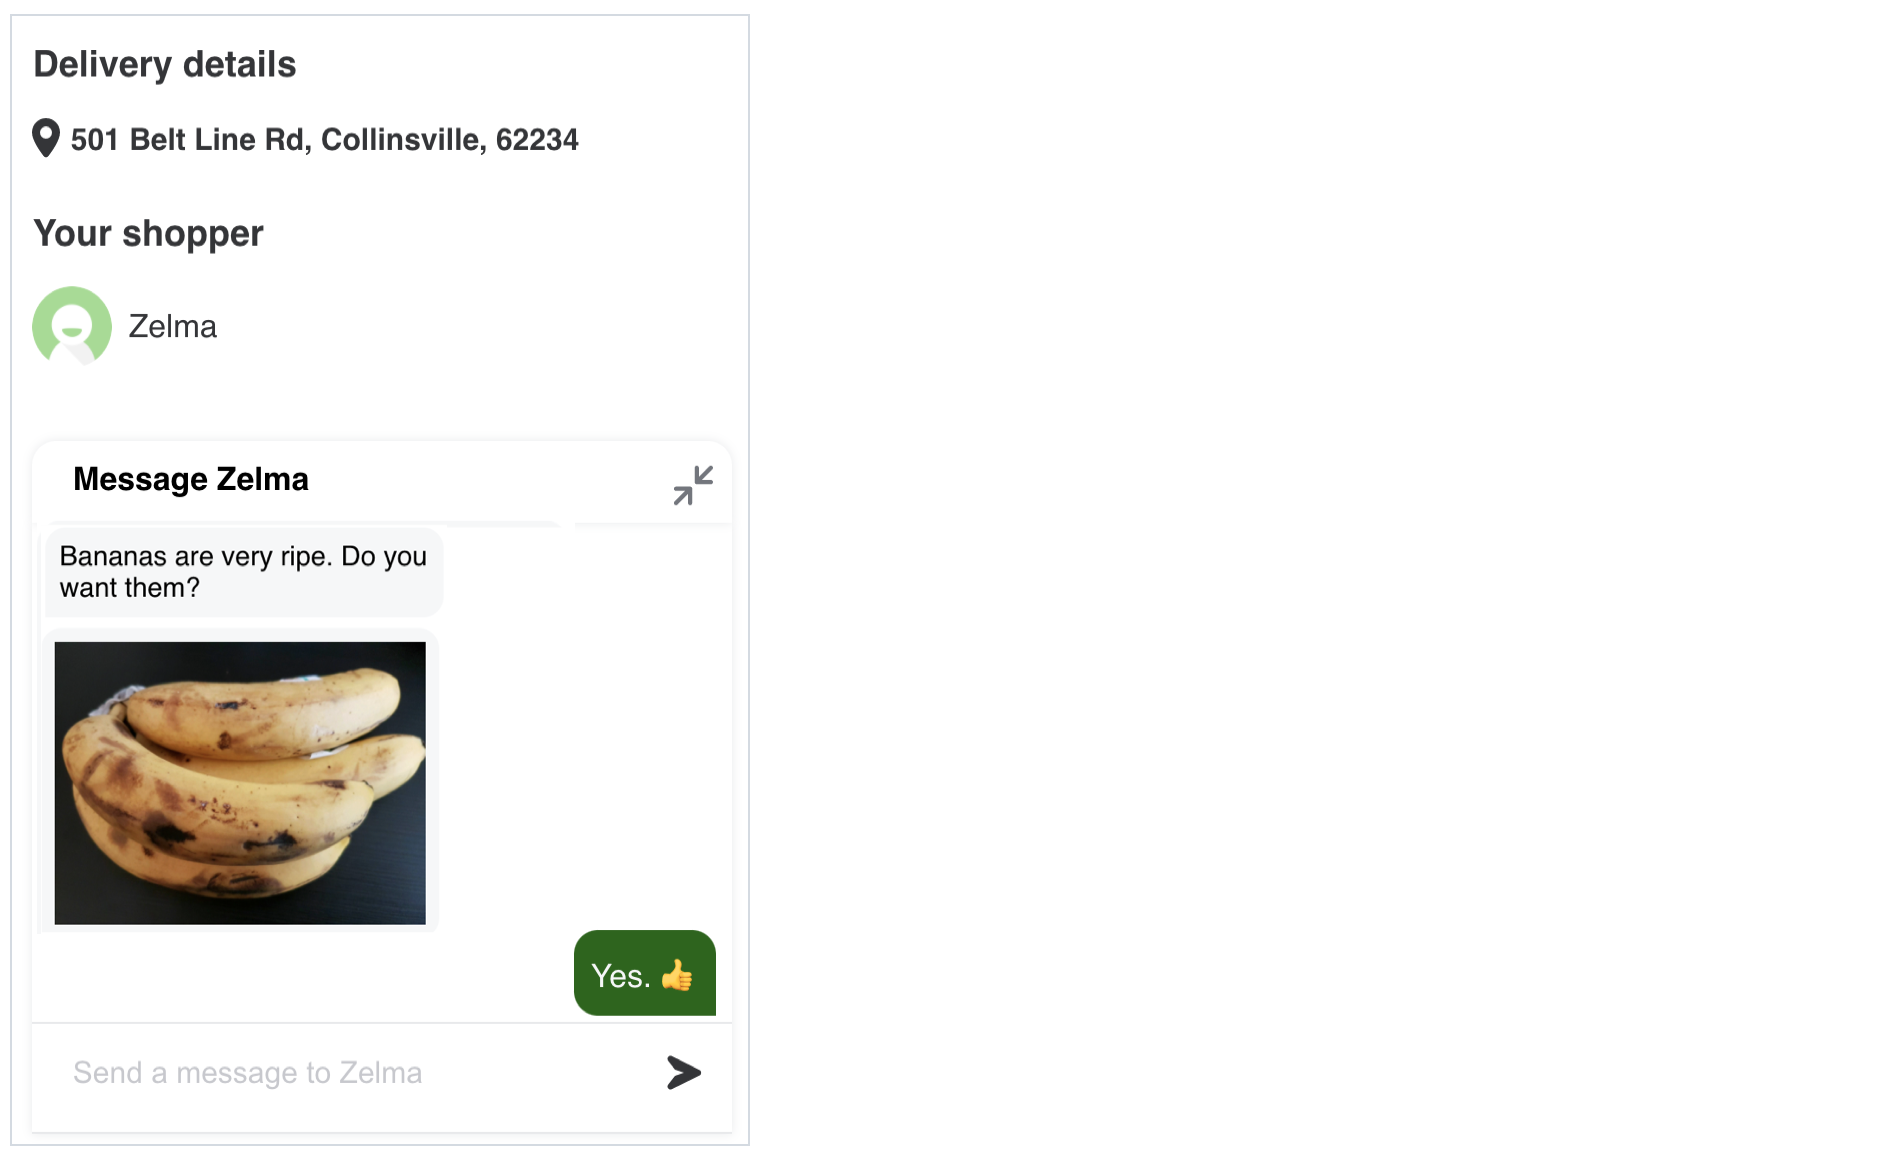 The image shows a shopper message that reads “The bananas are overripe. Do you want them?” with a photo of the produce. The customer responds with &quot;Yes&quot; and a thumbs up emoji.